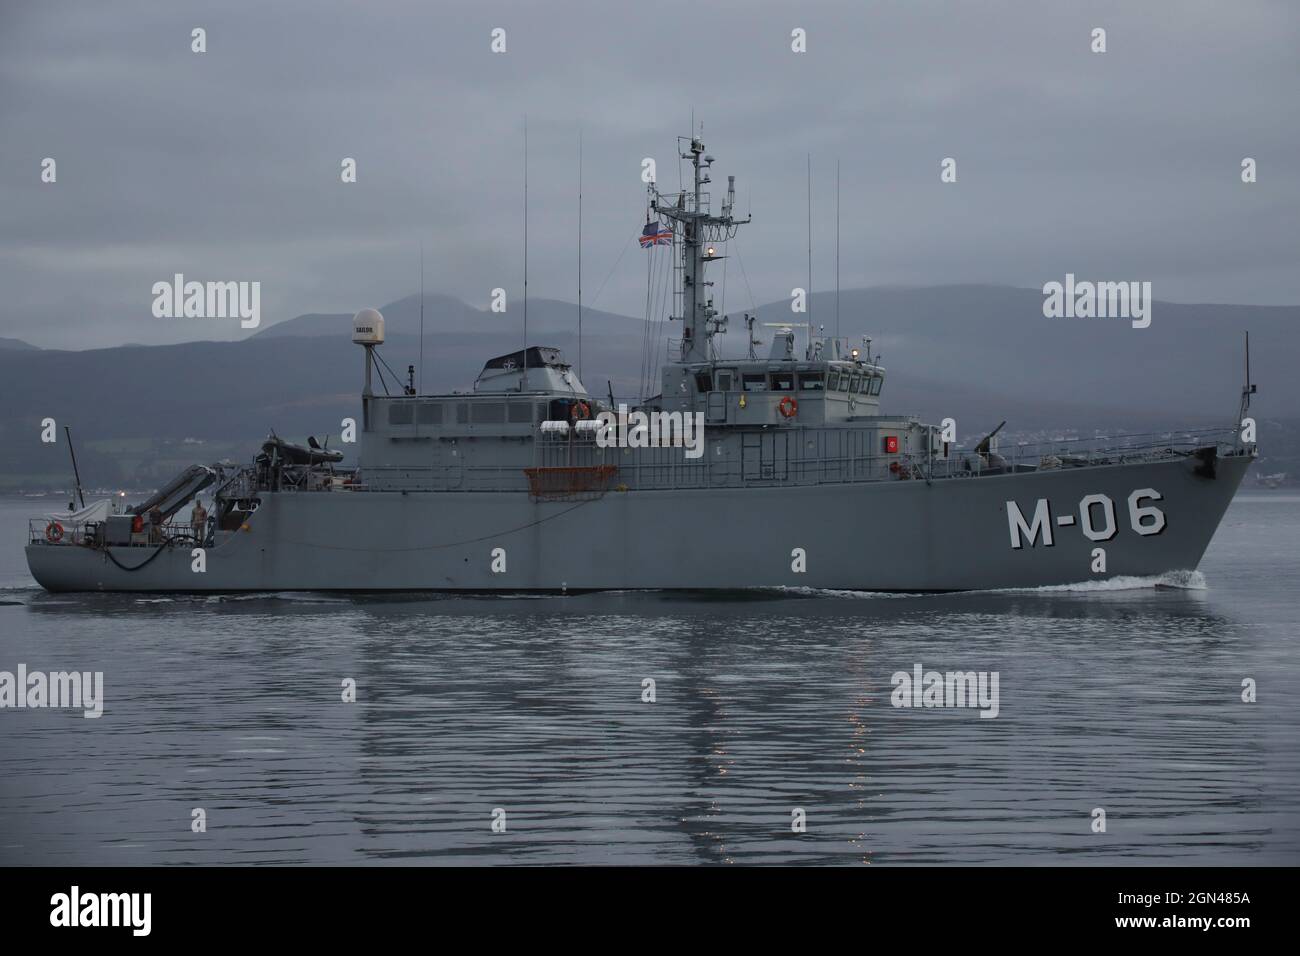 LVNS Talivaldis (M-06), an Alkmaar-class (Tripartite) minehunter operated by the Latvian Navy, passing Greenock on the Firth of Clyde, prior to participating in the military exercises Dynamic Mariner 2021 and Joint Warrior 21-2. This vessel once served in the Royal Netherlands Navy before being decommissioned and sold to Latvia. Stock Photo